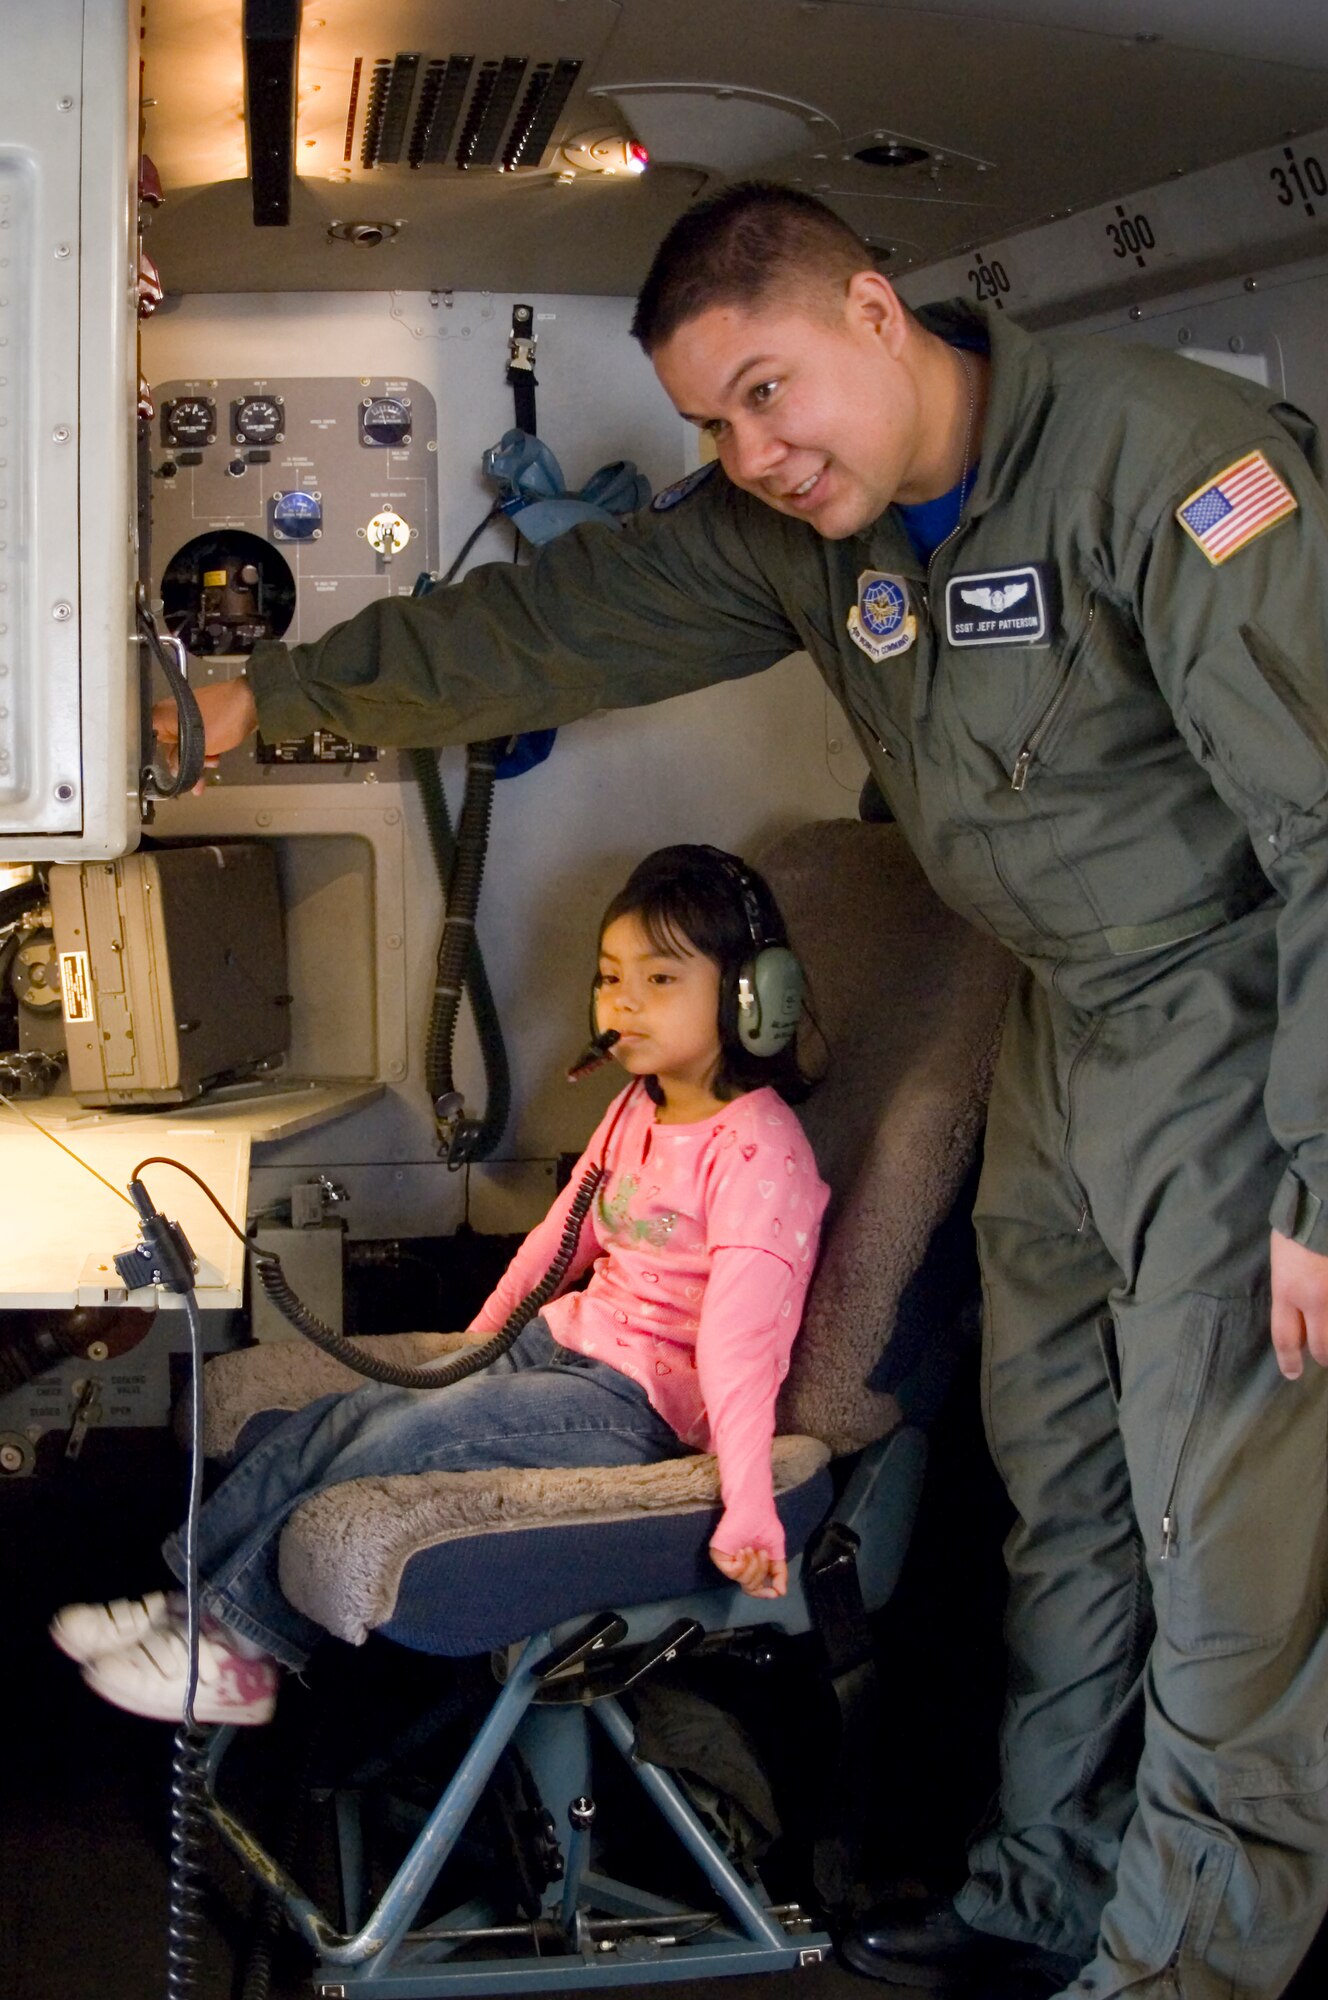 Staff Sgt. Jeff Patterson, a loadmaster with the 8th Airlift Squadron, adjusts the volume on his headset for five-year-old Iris Noquez.